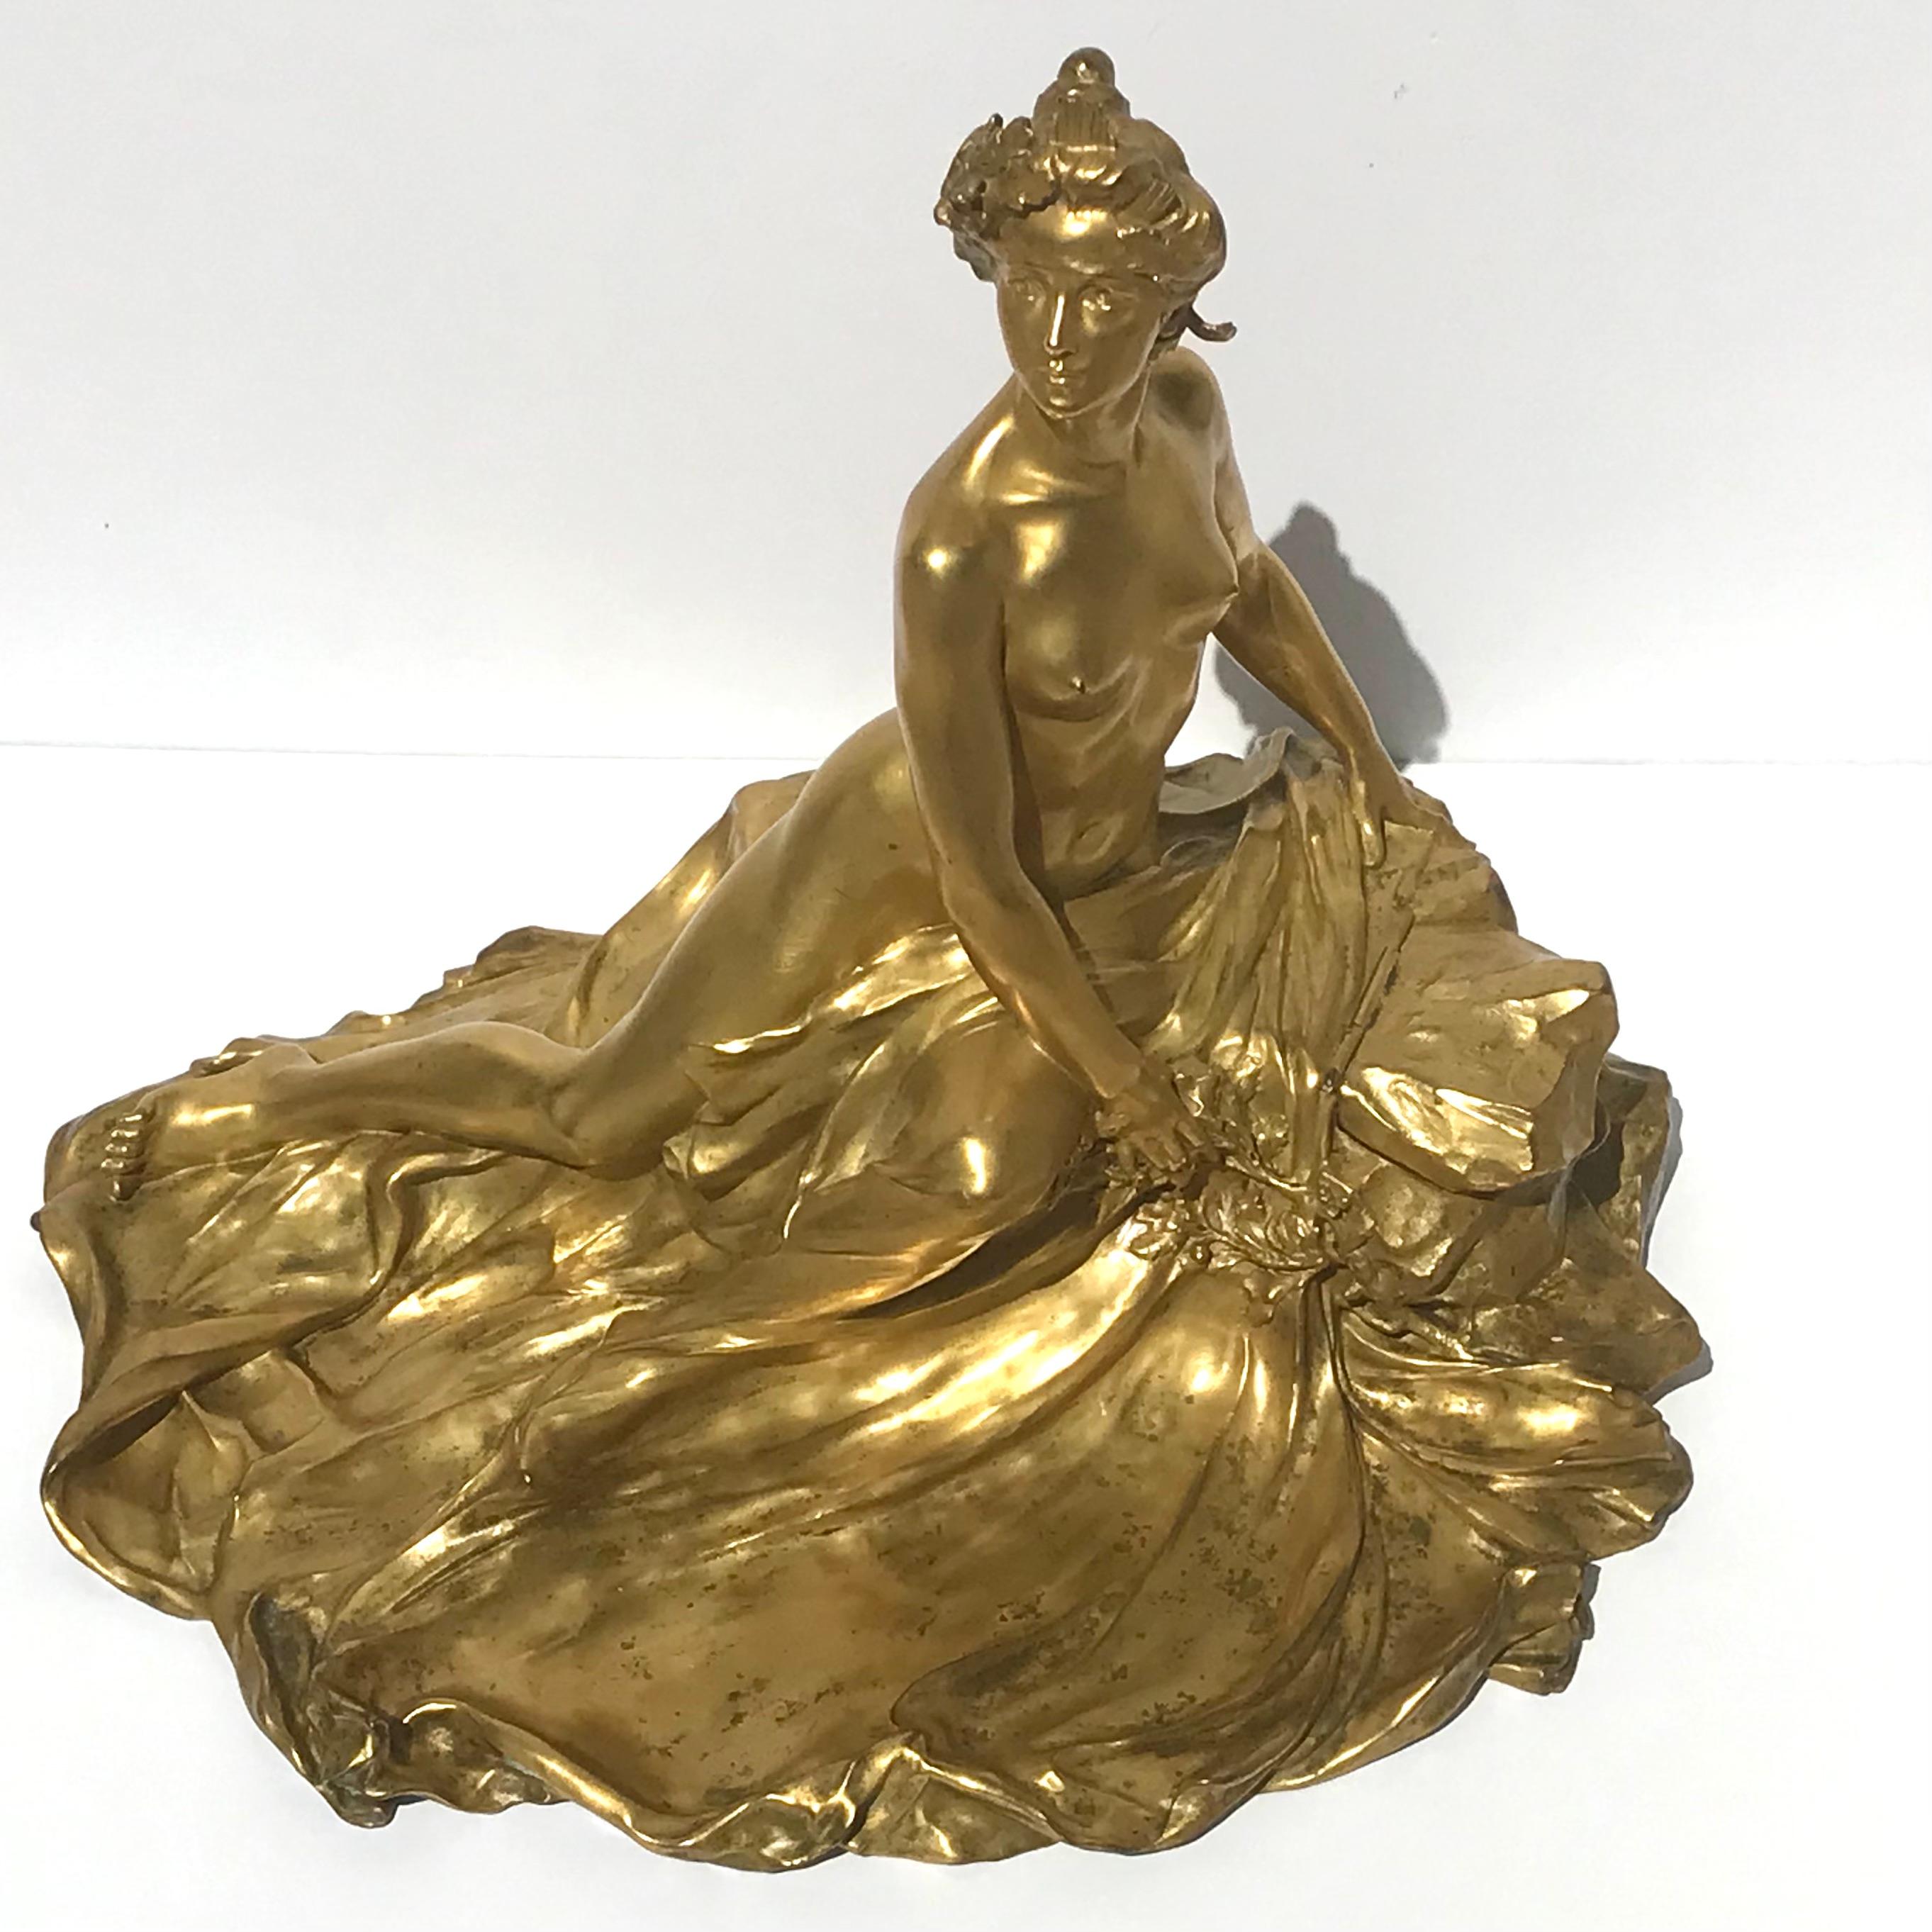 Raoul Larche (1860-1912) Monumental Inwell vide pouch.
'L'Idée, Allégorie sur un Rocher' A Gilt-Bronze Inkwell, circa 1900
Figural Centerpiece, Inkwell and vide pouch.
Gilt-bronze

Height 19 in.; Width 23 in.; Depth 18 in.
49 cm; 58.5 cm; 46